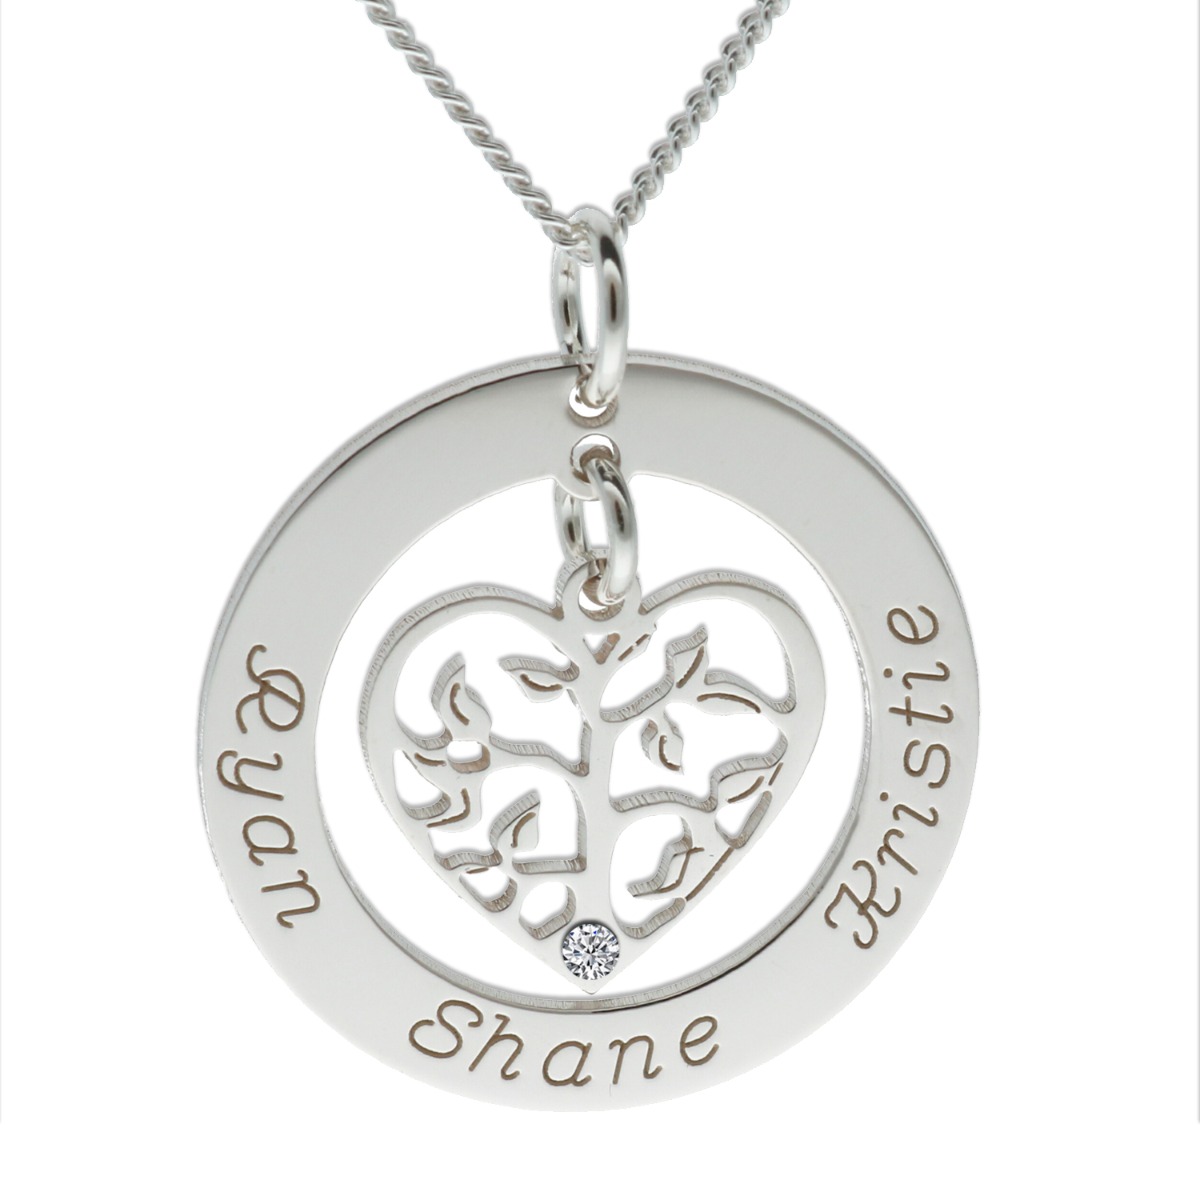 9ct White Gold Filigree Heart Tree of Life Family Necklace With Crystal Or Real Diamond